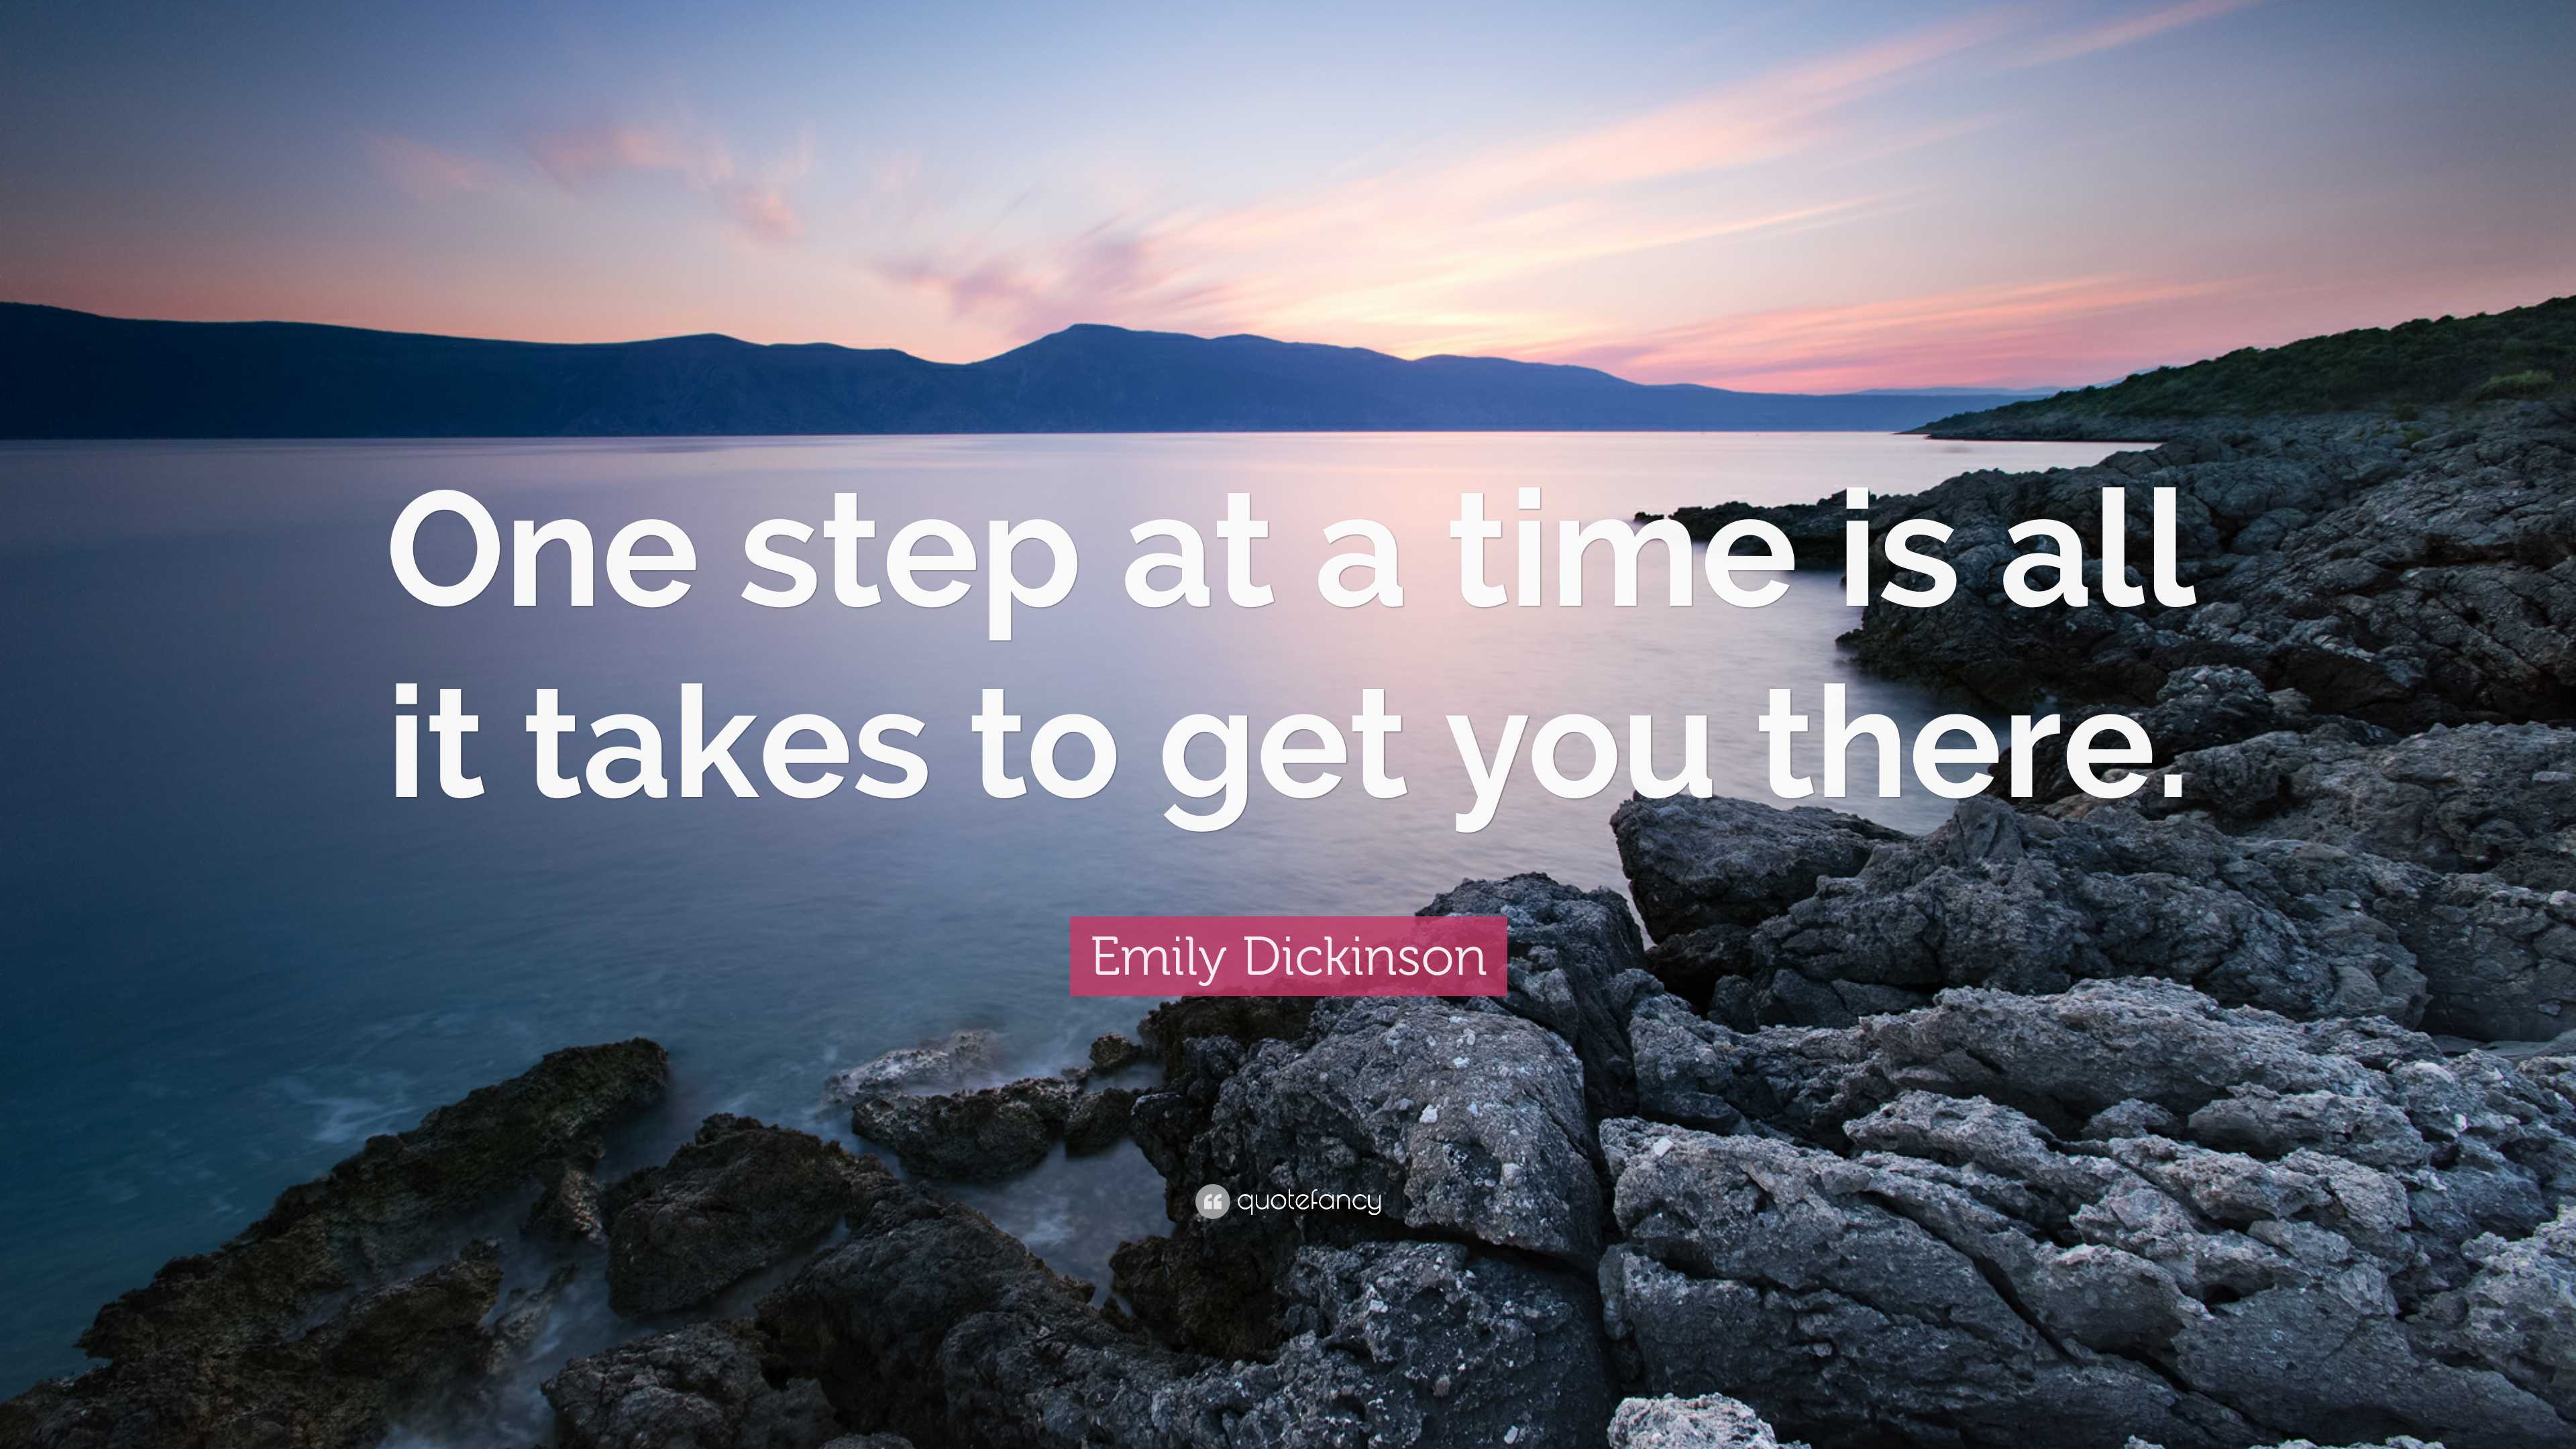 Emily Dickinson Quote: “One step at a time is all it takes to get you  there.”